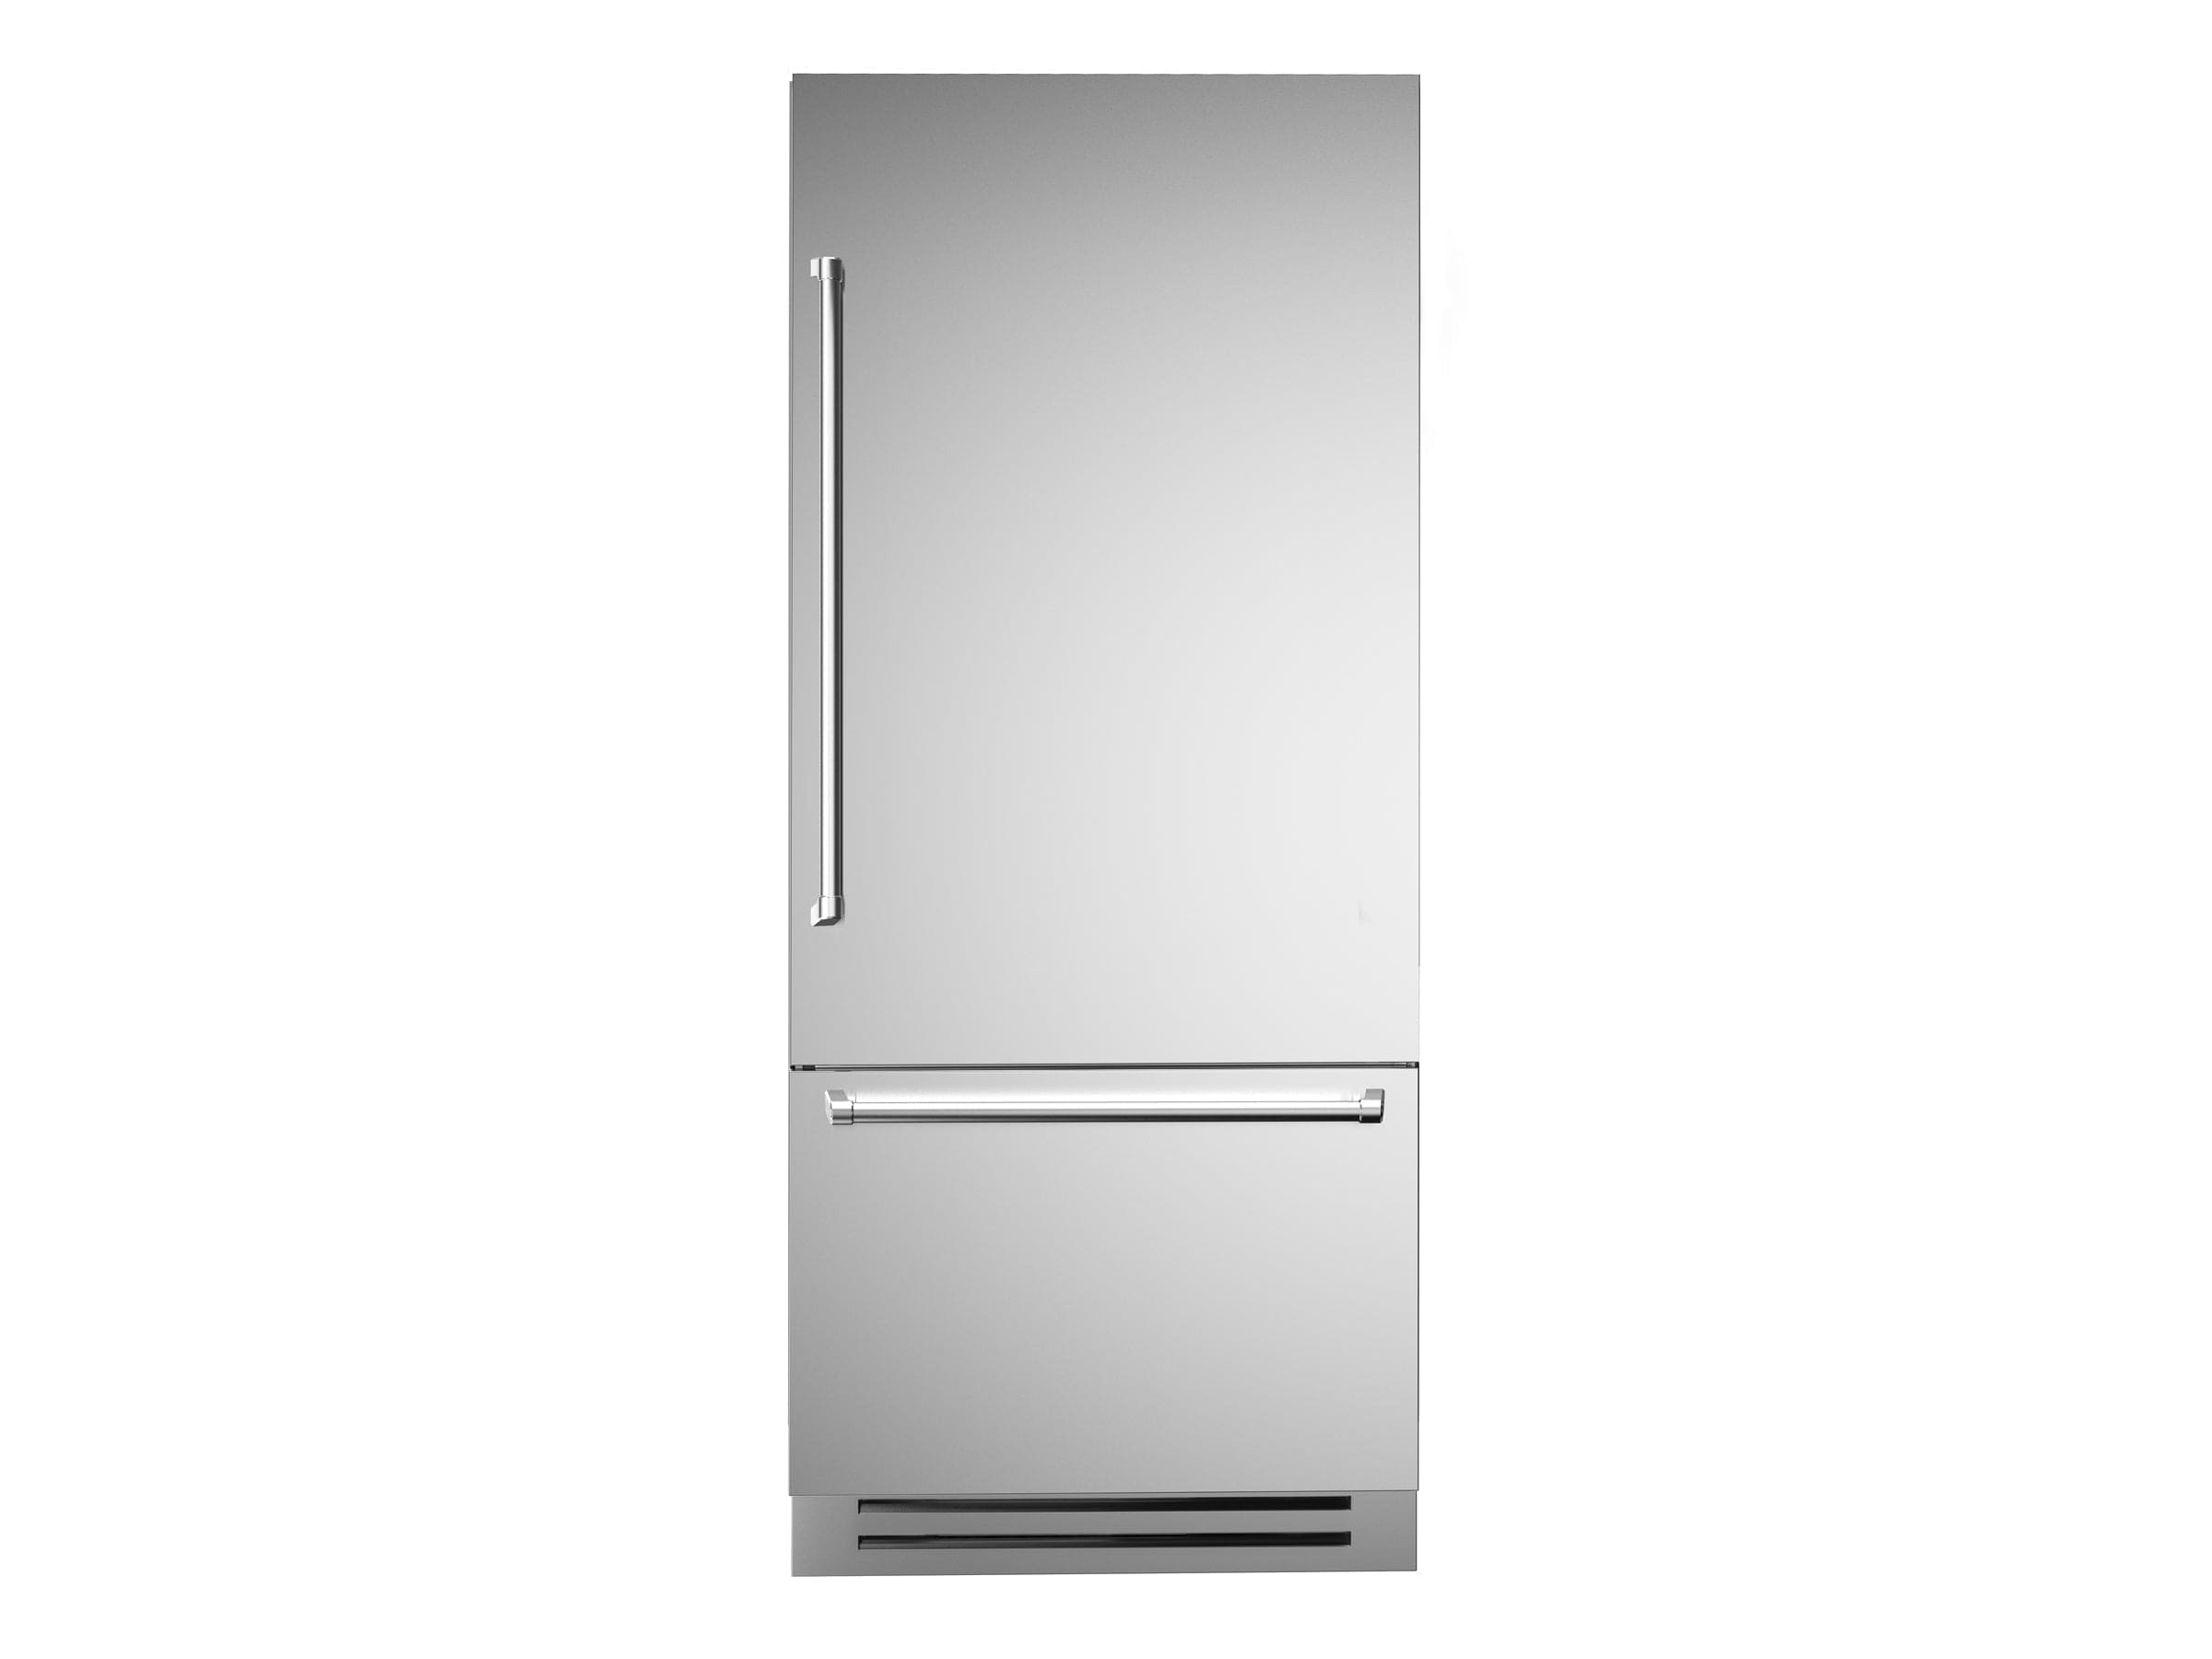 Bertazzoni 36" 19.6 Cu.Ft. Stainless Steel Built-In Bottom Mount Refrigerator With Ice Maker and Right Swing Door REF36BMBIXRT Luxury Appliances Direct